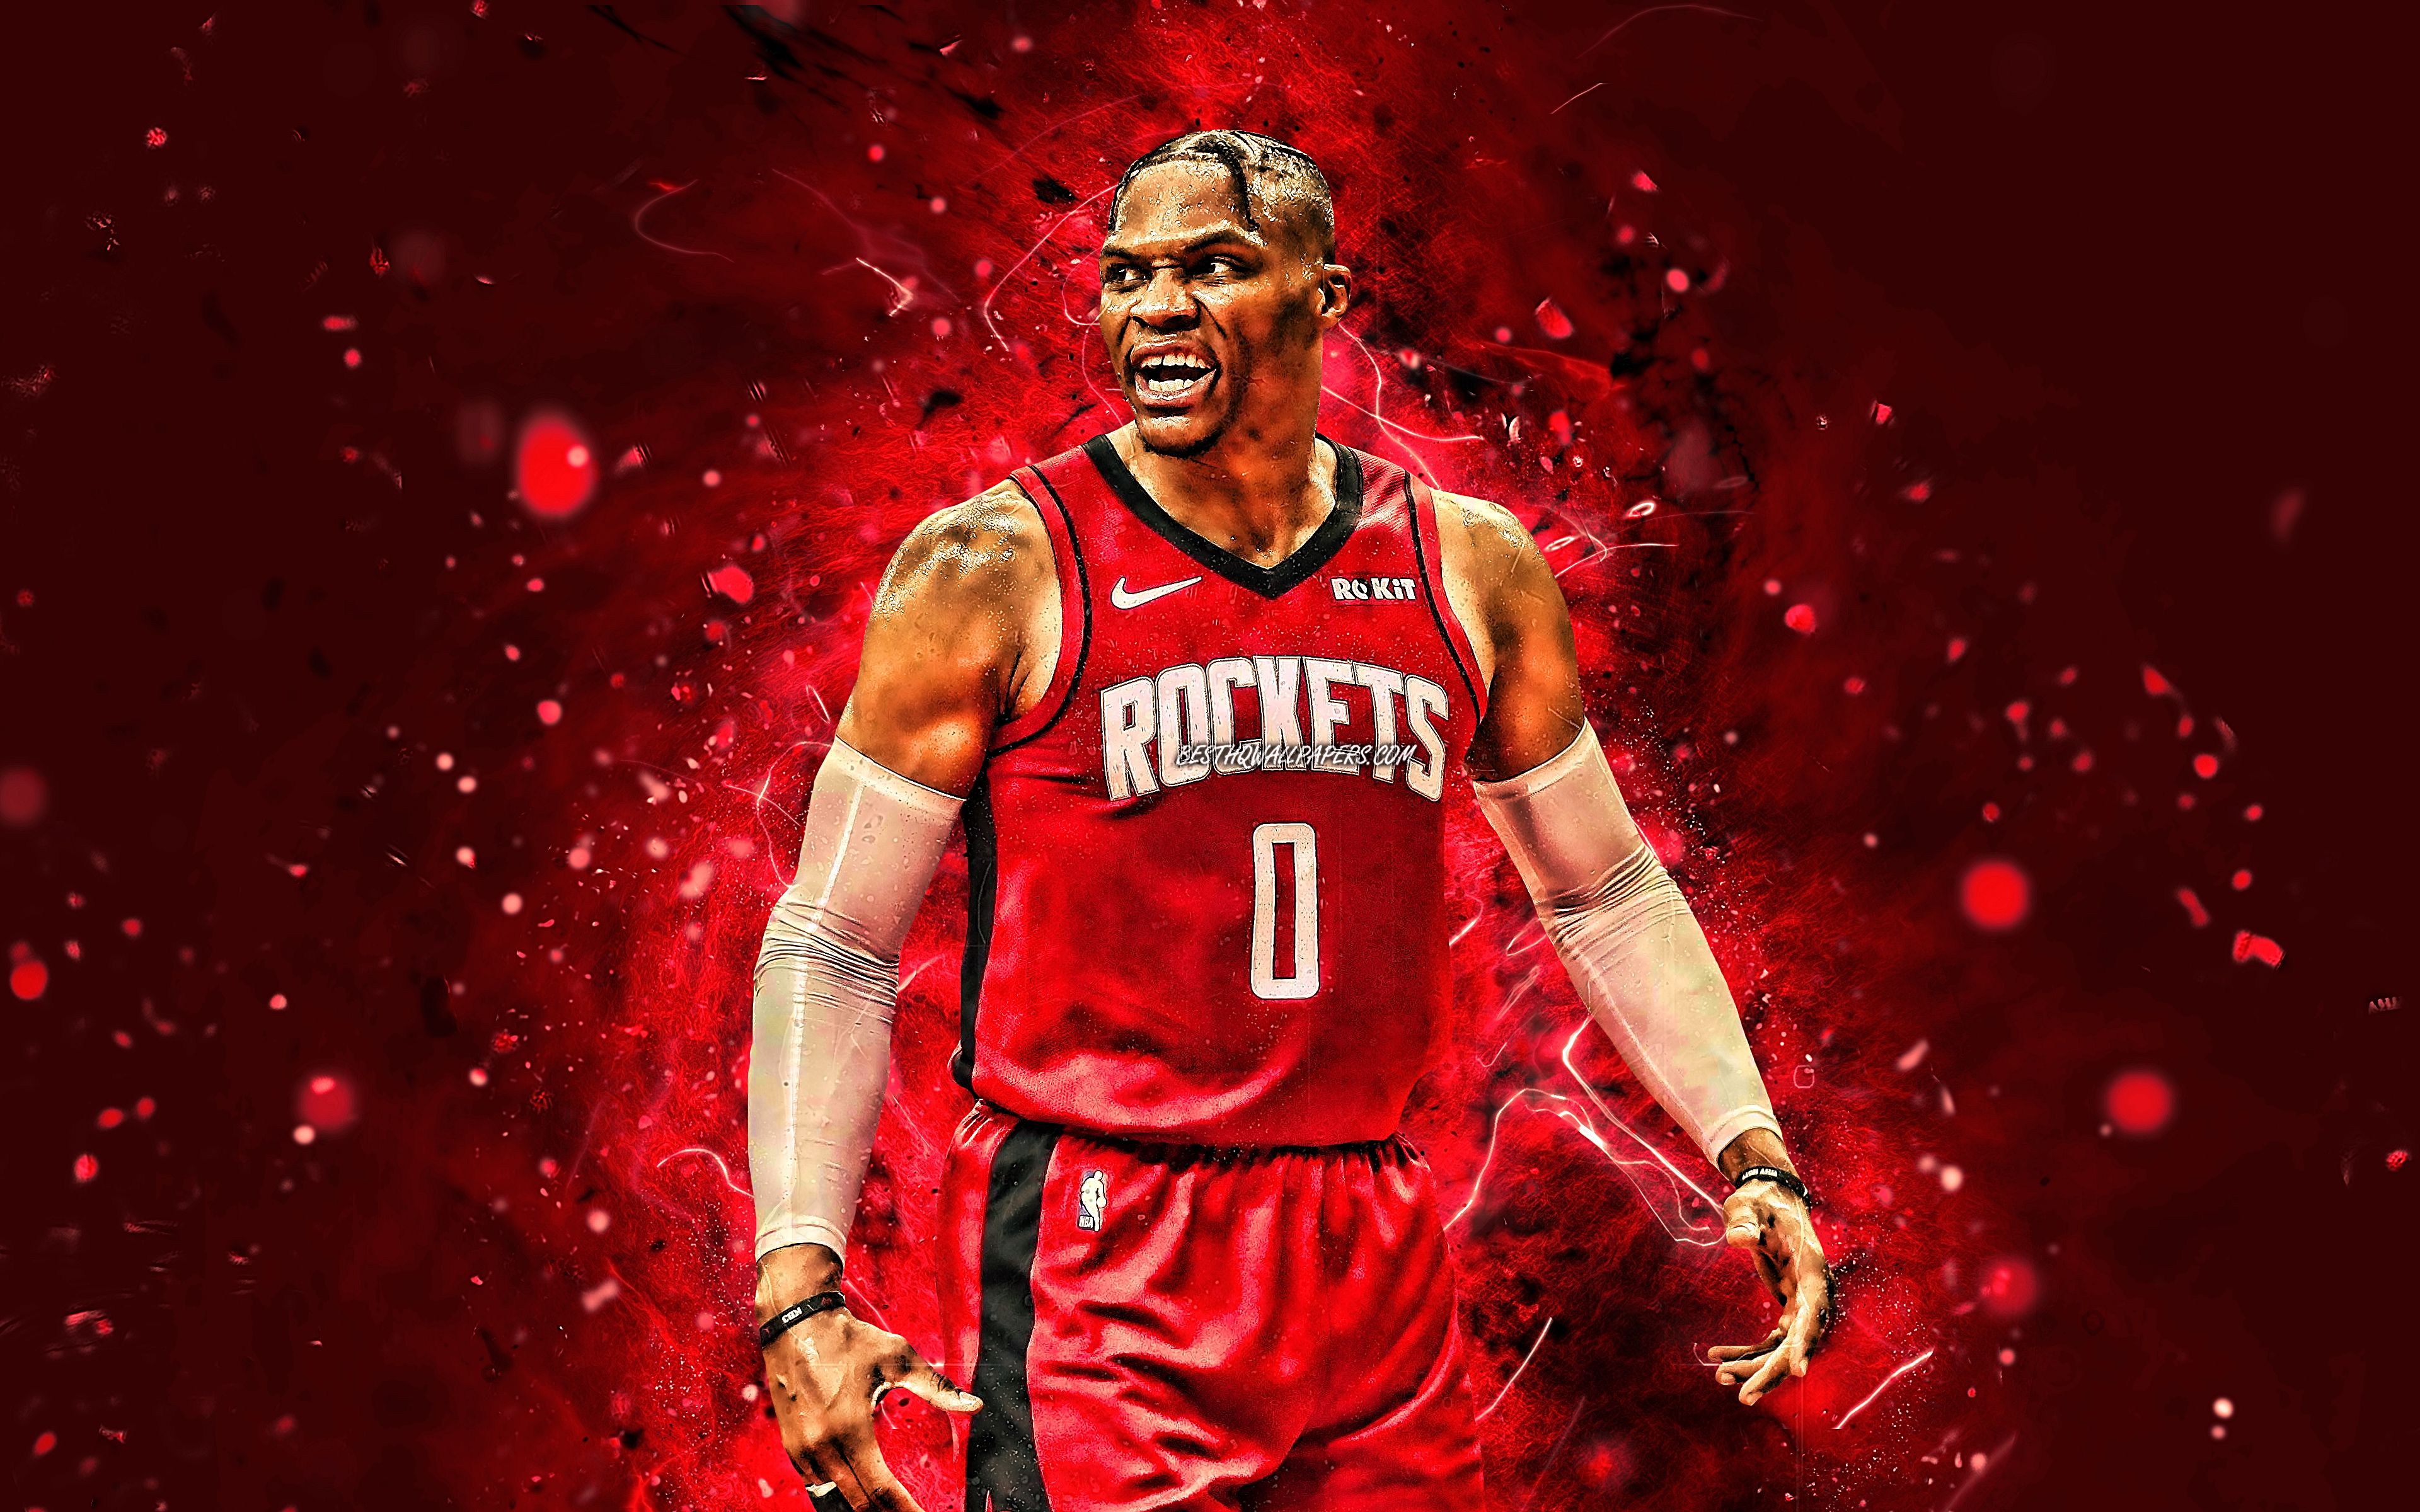 Download wallpaper Russell Westbrook, 4k, Houston Rockets, NBA, red neon lights, basketball stars, Russell Westbrook III, basketball, USA, Russell Westbrook Houston Rockets, creative, Russell Westbrook 4K for desktop with resolution 3840x2400